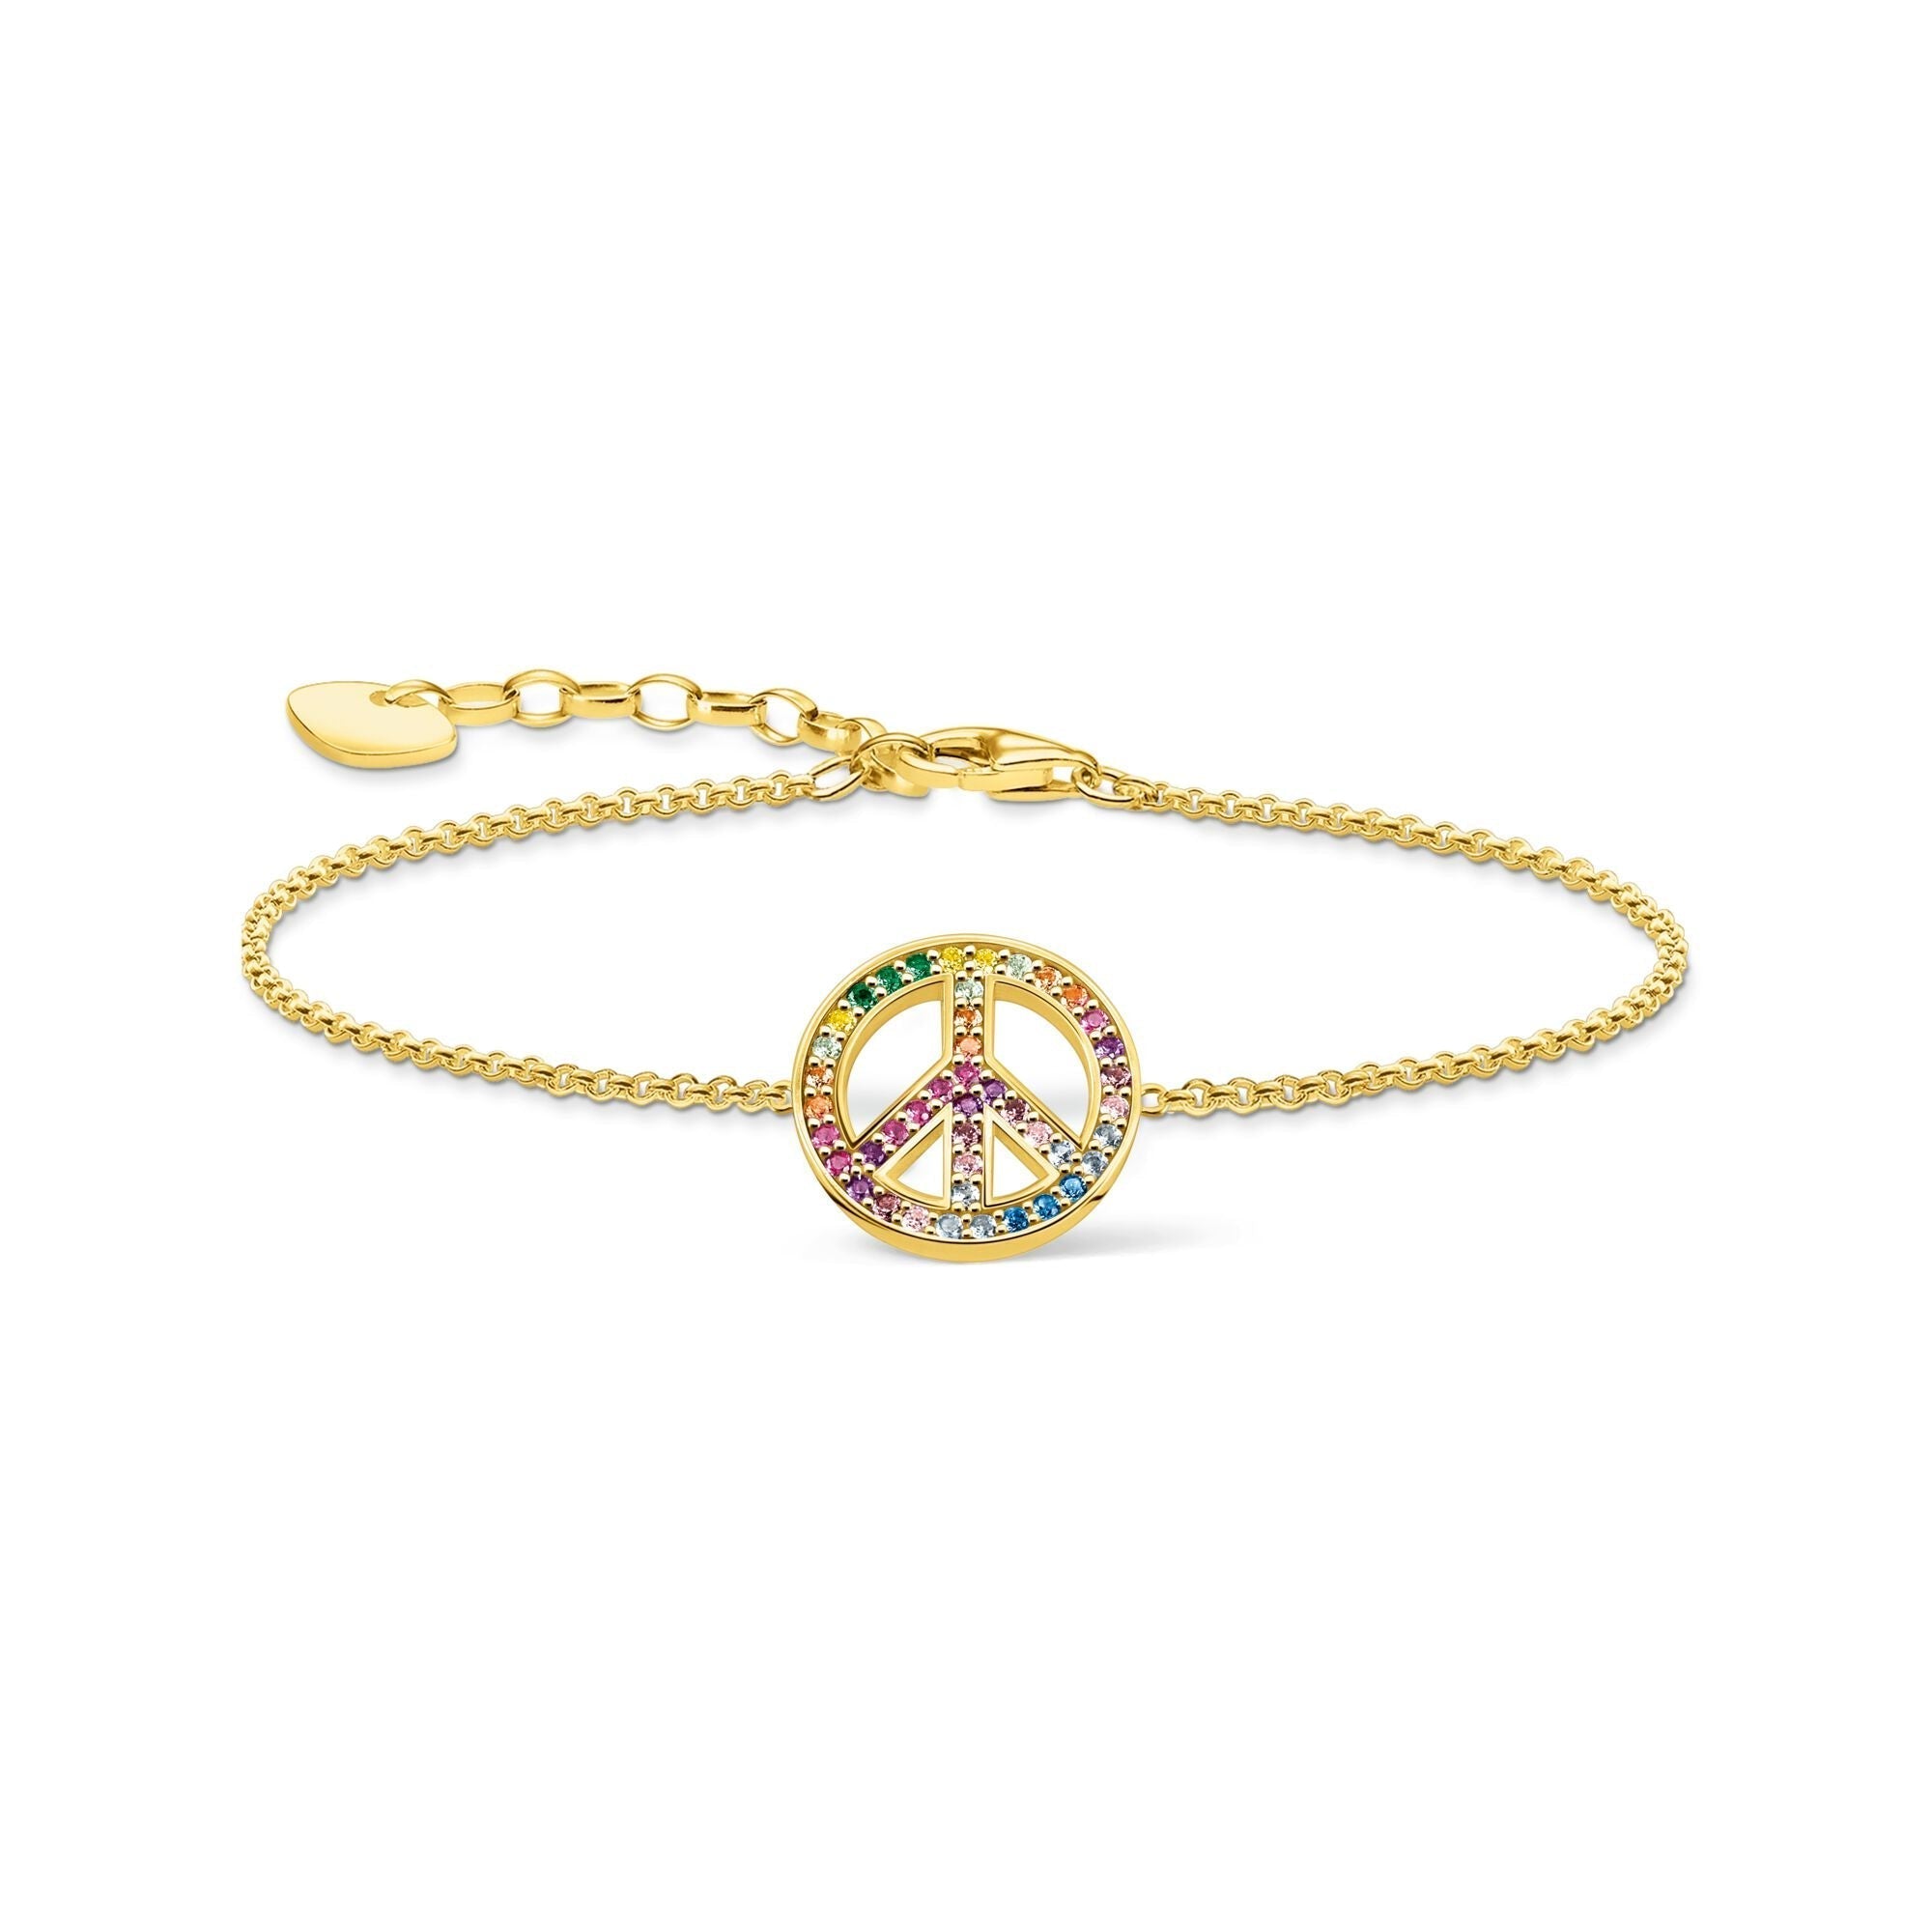 THOMAS SABO Gold Plated Bracelet with Peace Sign